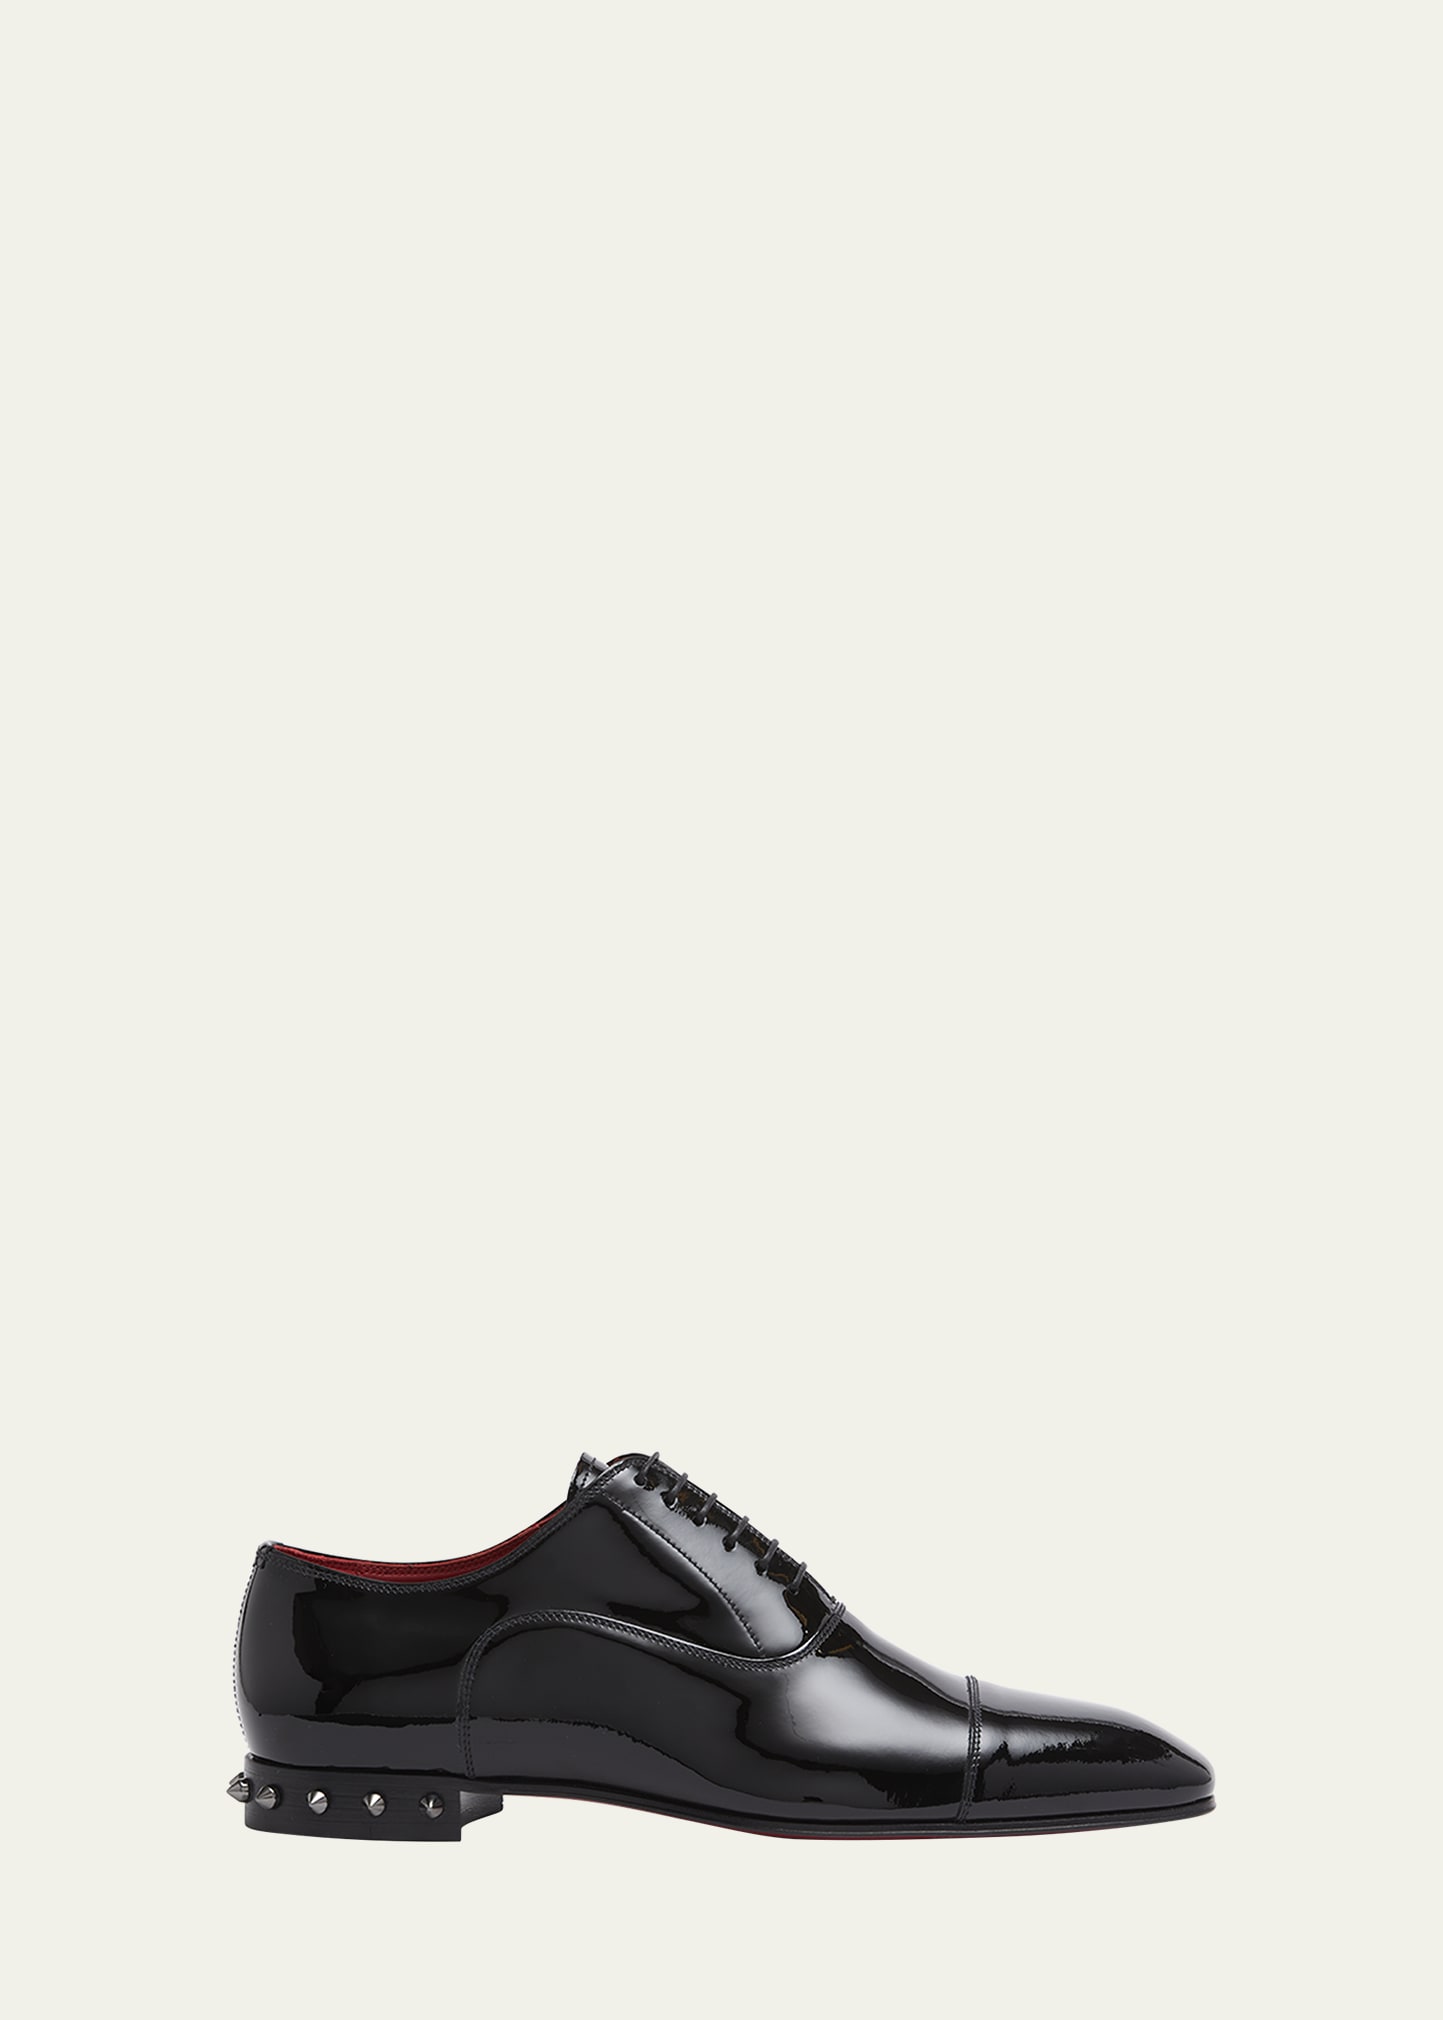 Christian Louboutin Men's Spiked Patent Leather Oxford Shoes In Black/gun Metal/l